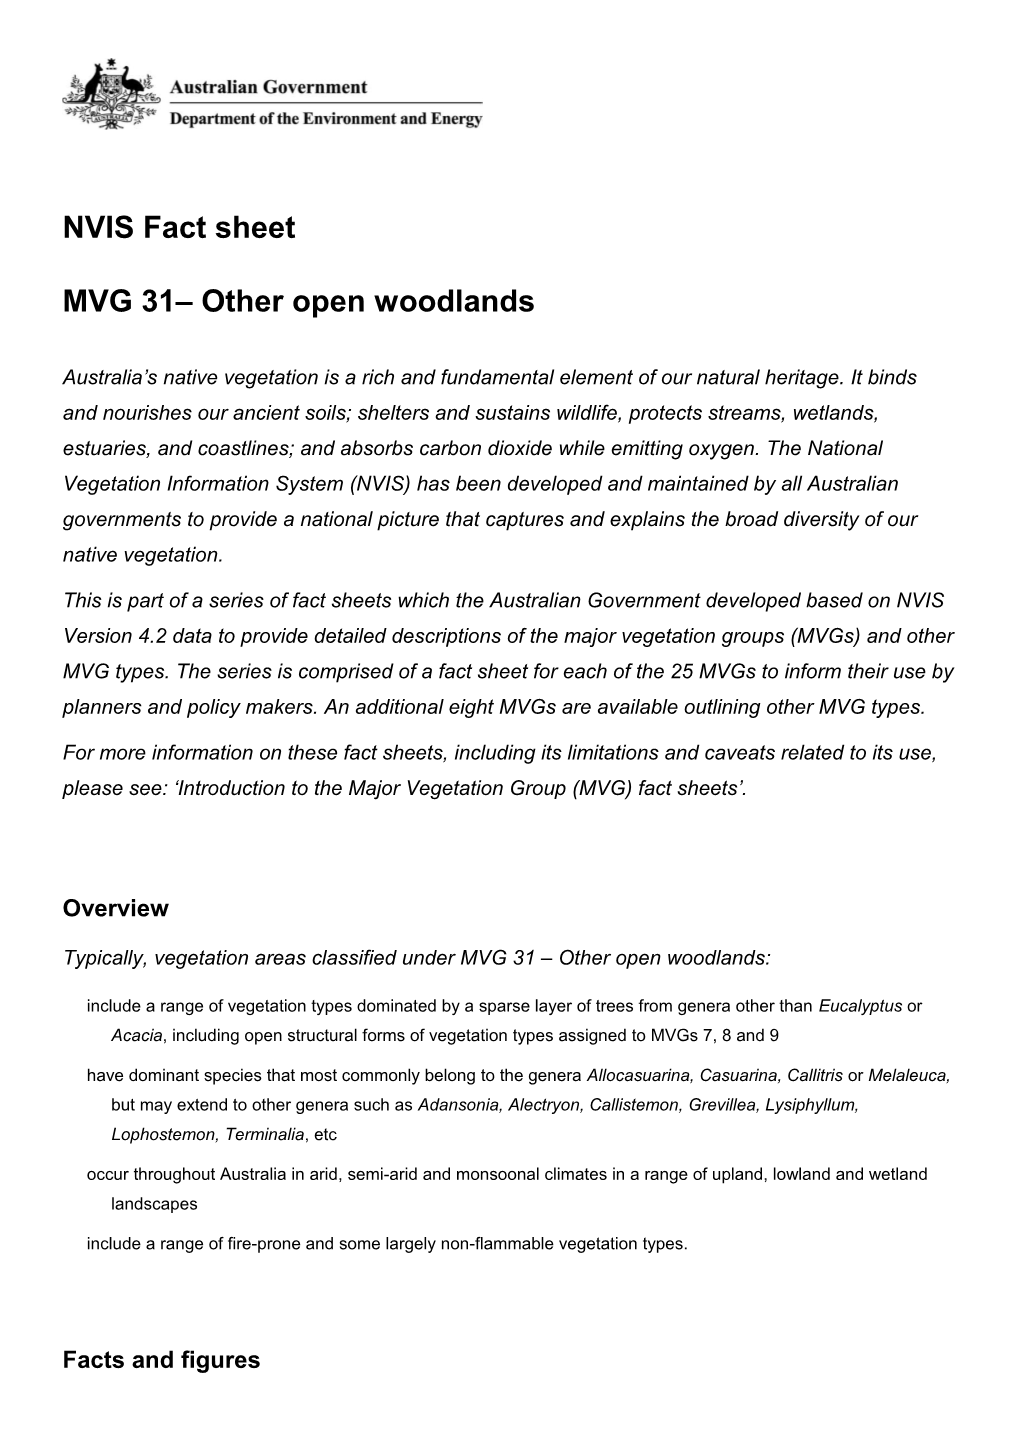 NVIS Fact Sheet MVG 31 Other Open Woodlands